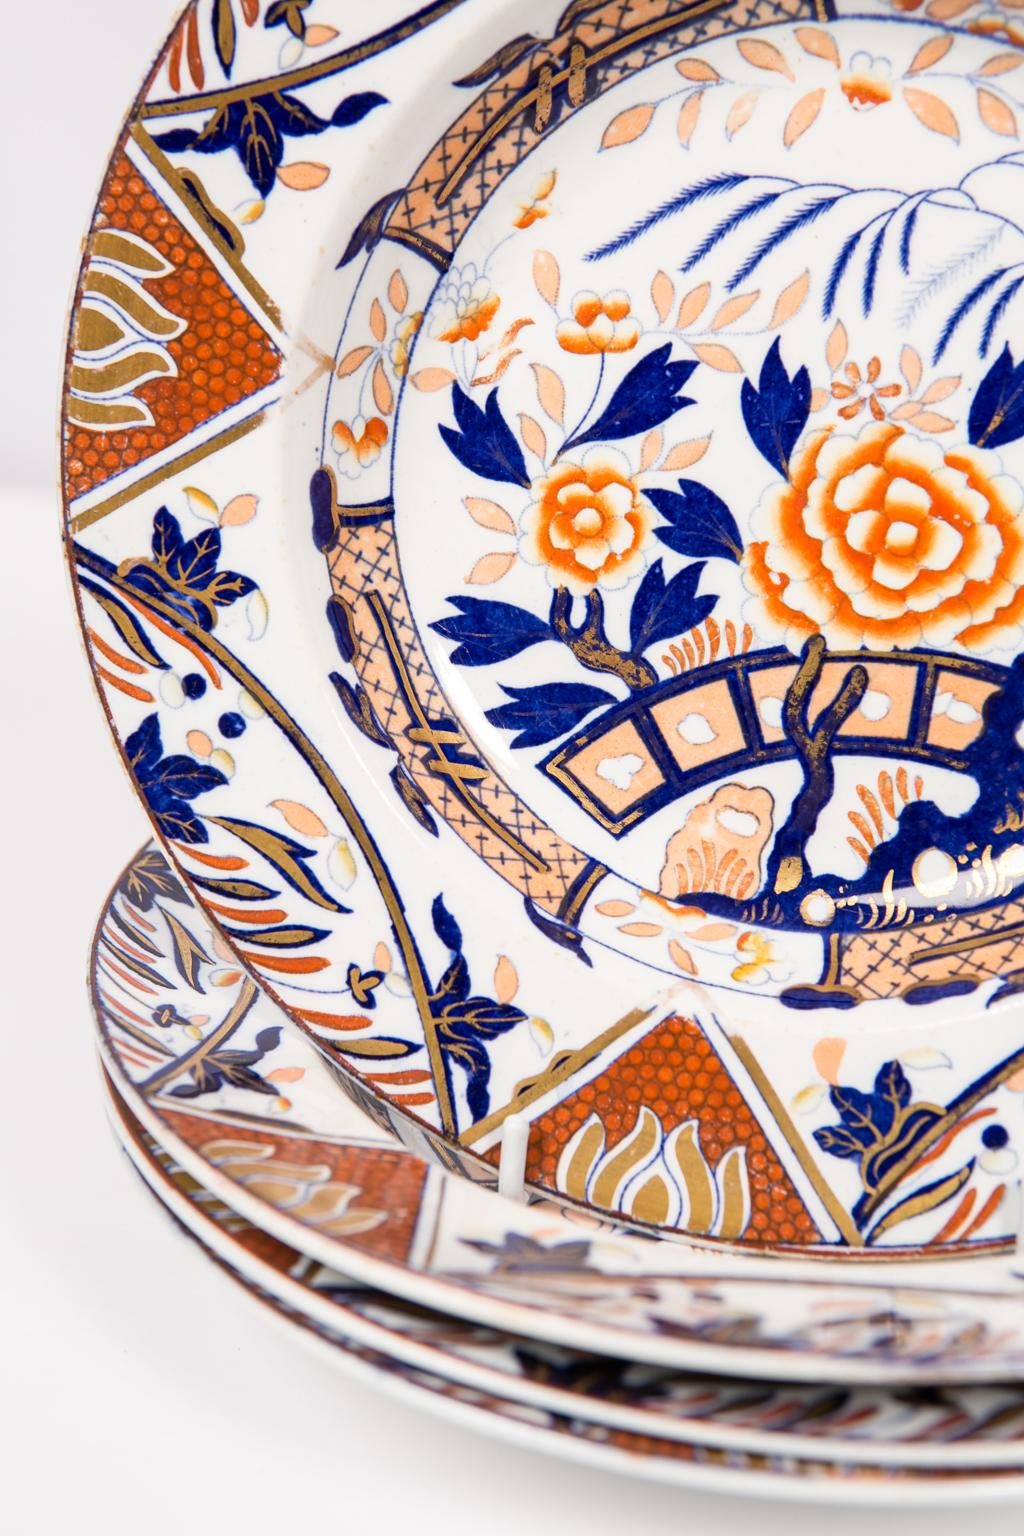 This set of a dozen 19th century English Imari soup or pasta dishes is painted in iron red, deep blue, and gold.  Each dish is fully decorated showing a traditional garden scene including a large orange peony, the branches of a willow tree, blue